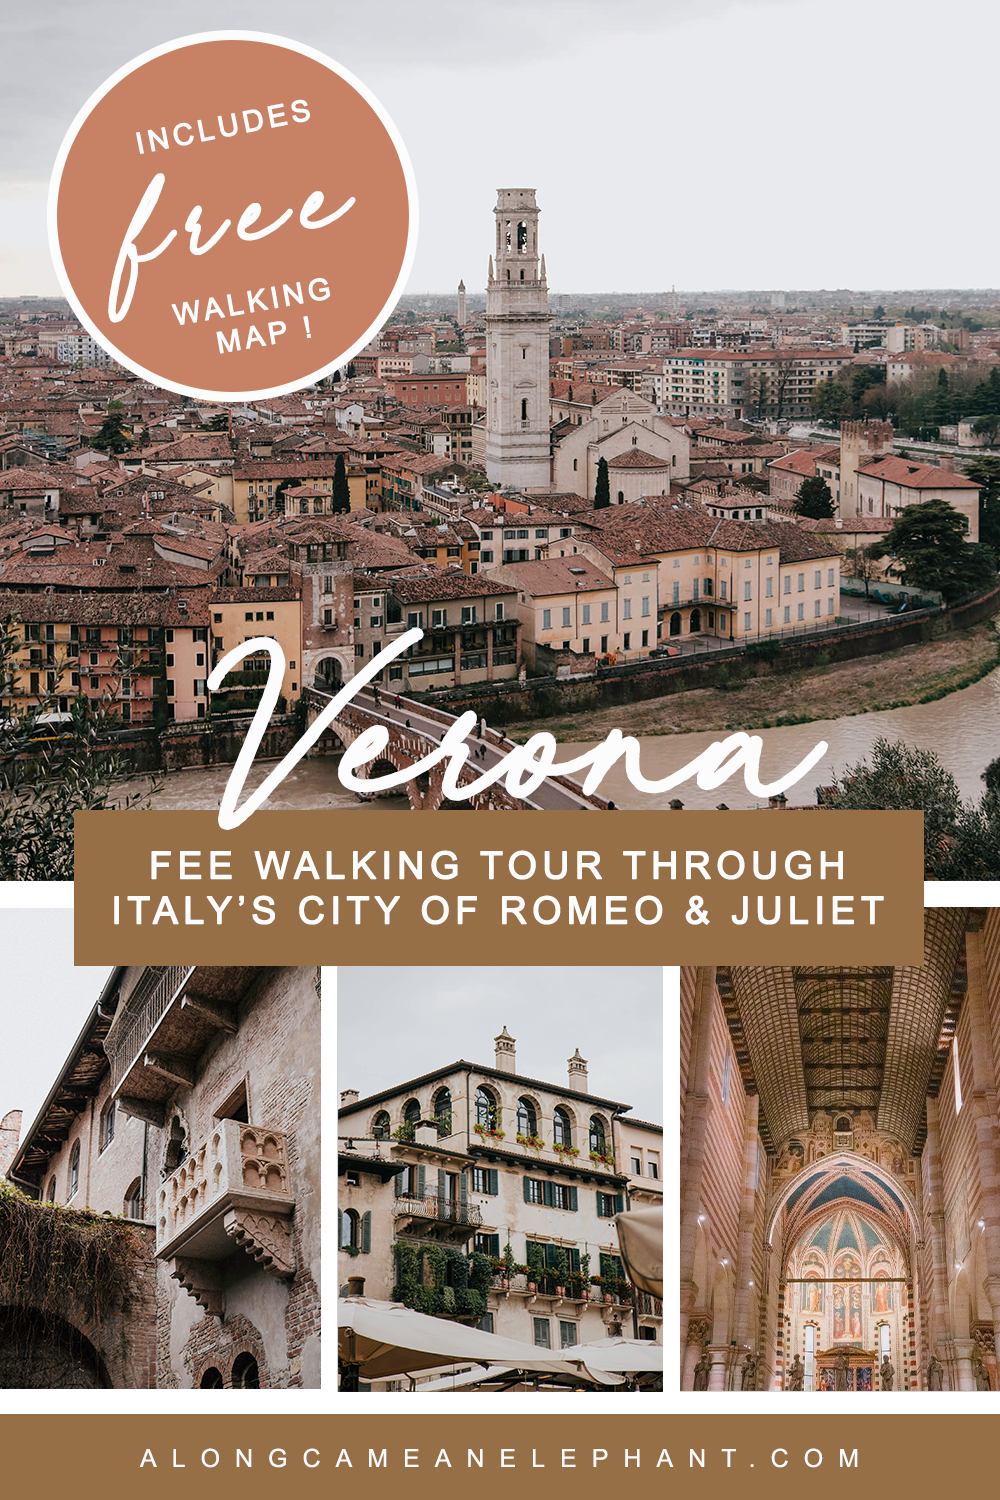 Our Free Walking Tour Verona takes you along the prettiests streets in Verona and the best things to do. Includes the Verona Arena, Juliet's House, Torre Dei Lamberti and cute piazzas! Includes a free walking tour Verona map.

#verona #europe #italy #walkingtour #romeo+juliet